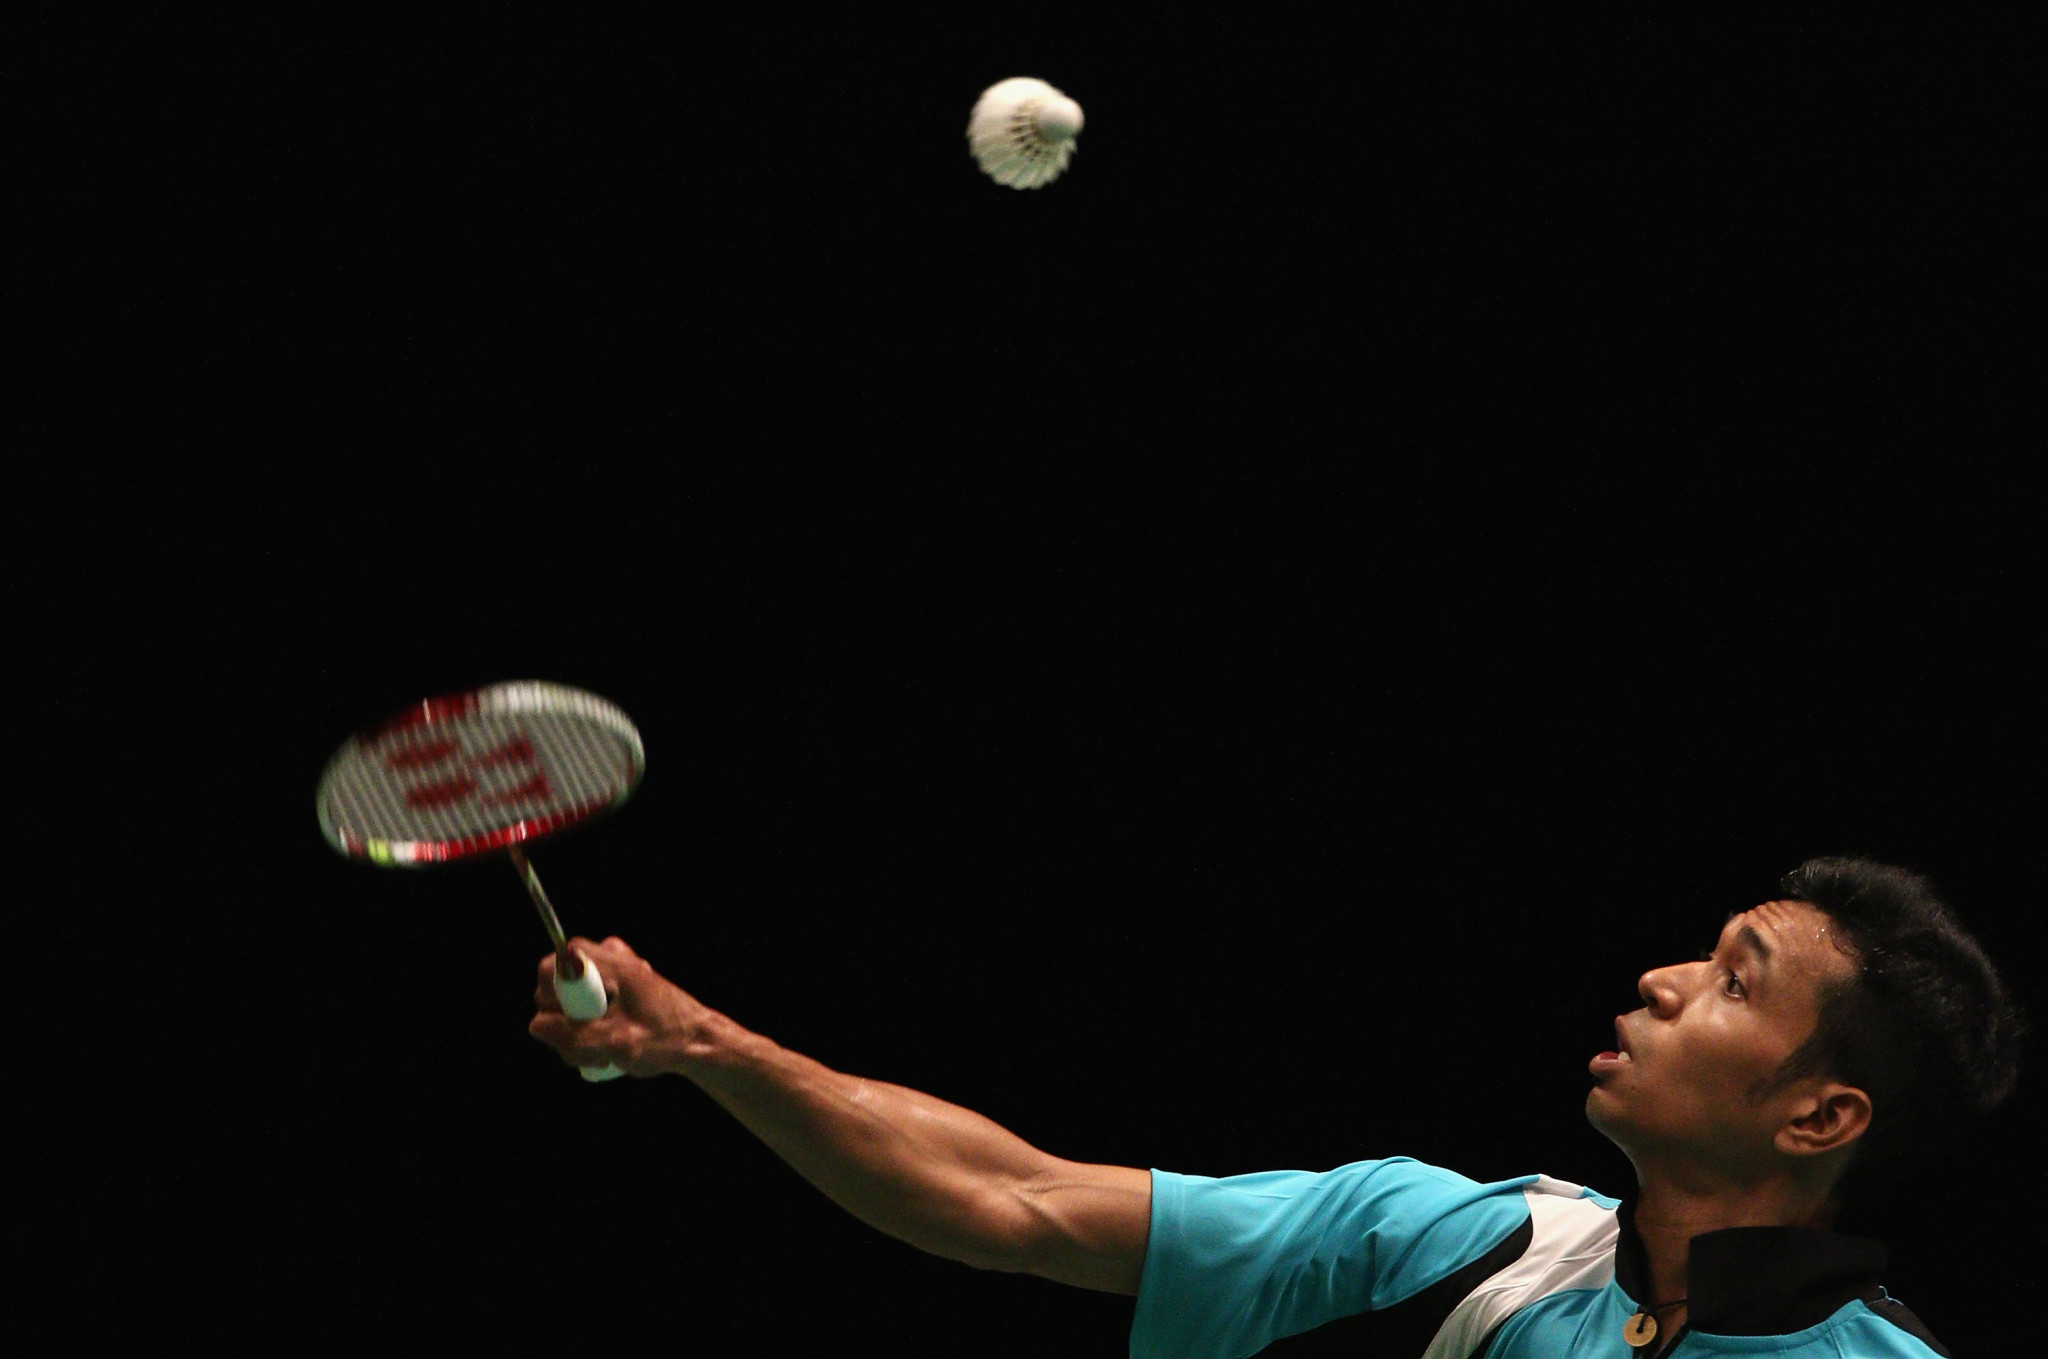 Zulfadli Zulkiffli is one of two Malaysian players given career-ending bans by the BWF ©Getty Images